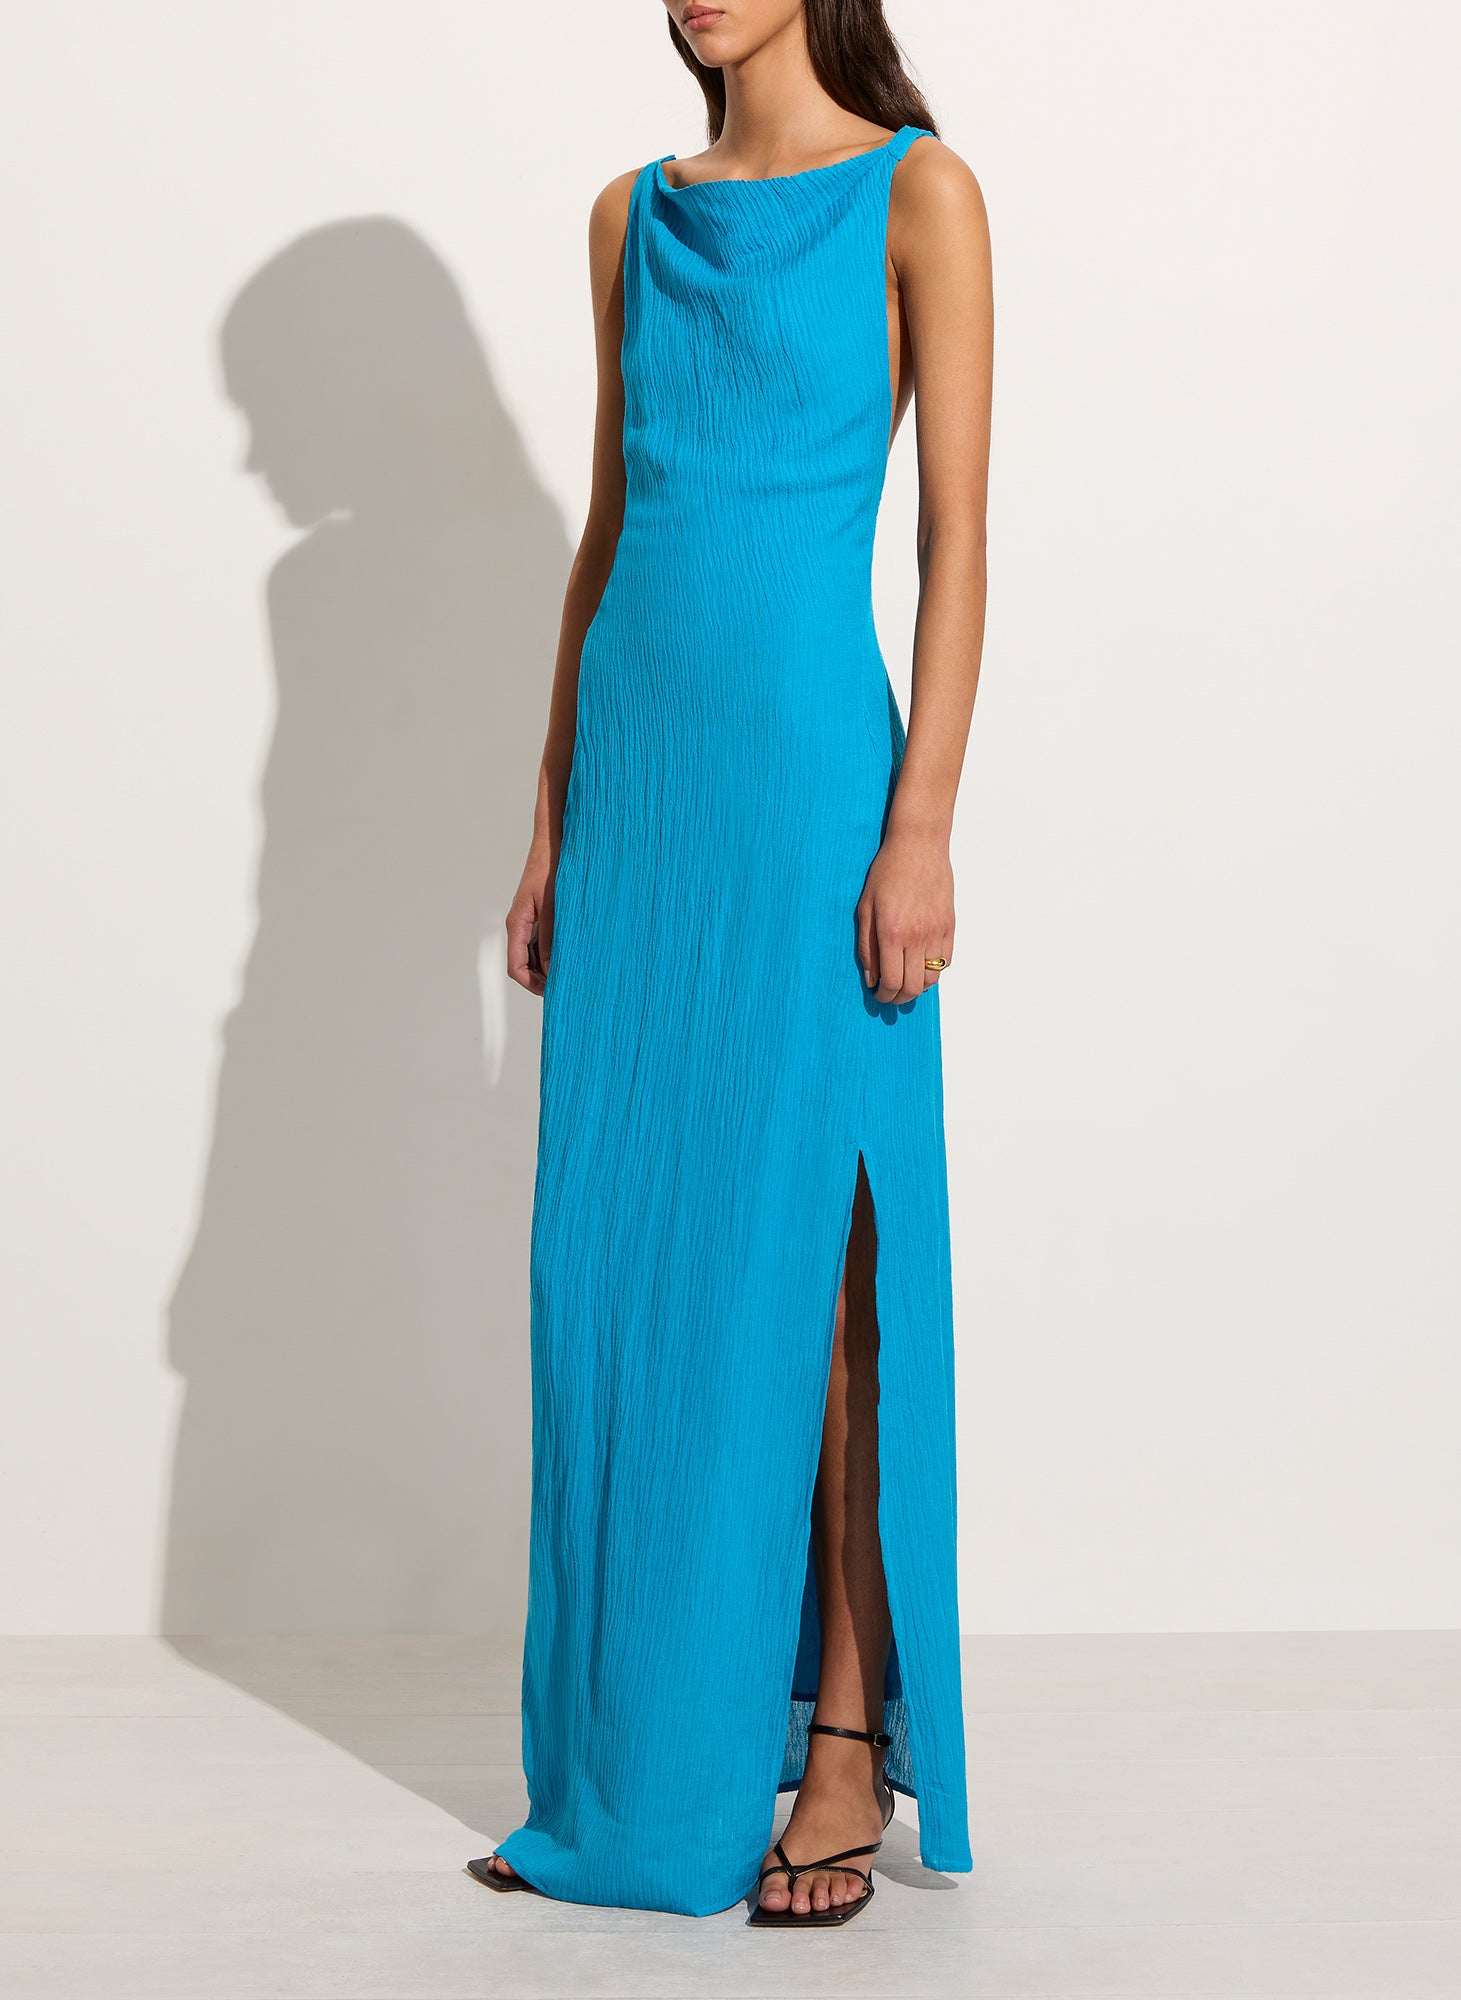 Faithfull The Brand Palermo Maxi Dress in Turqiouse Blue available at The New Trend Australia.